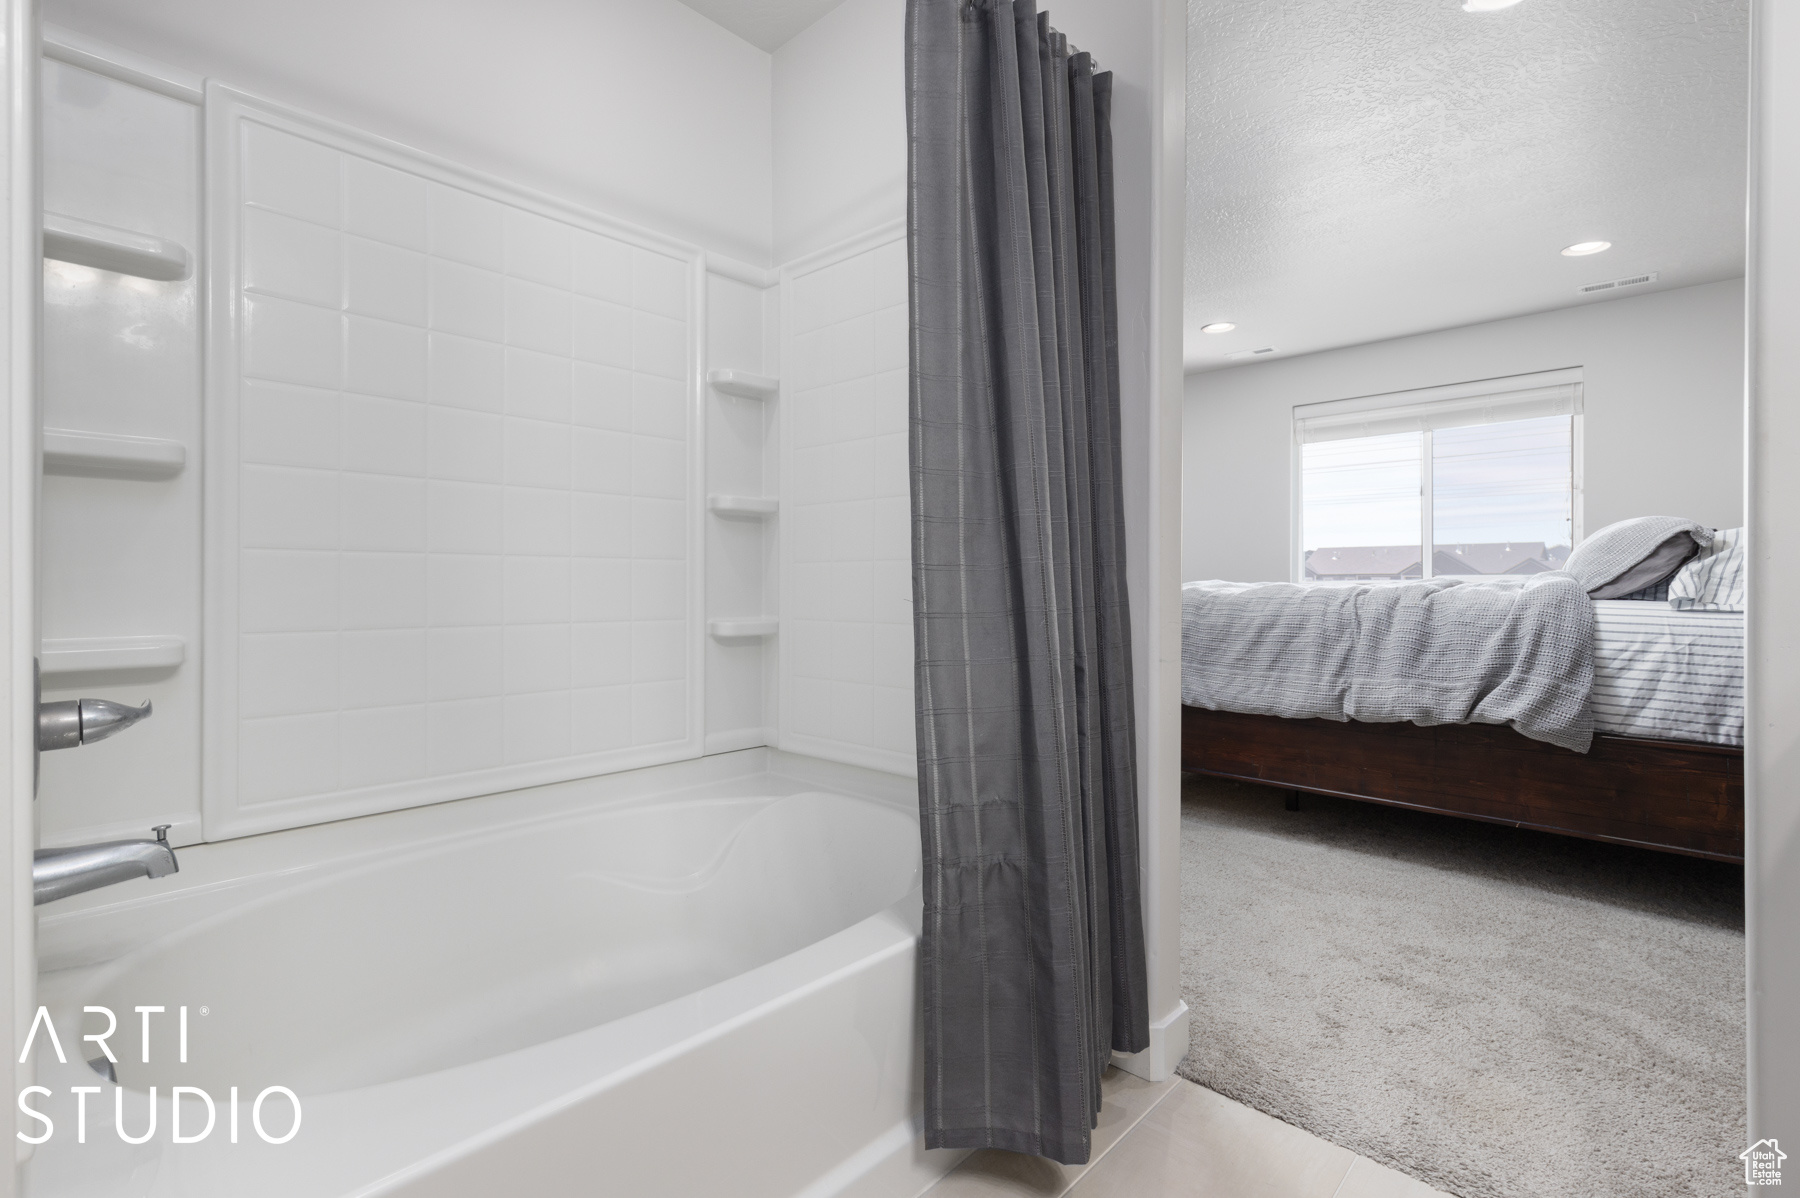 Bathroom featuring shower / bath combo with shower curtain, tile floors, and a textured ceiling